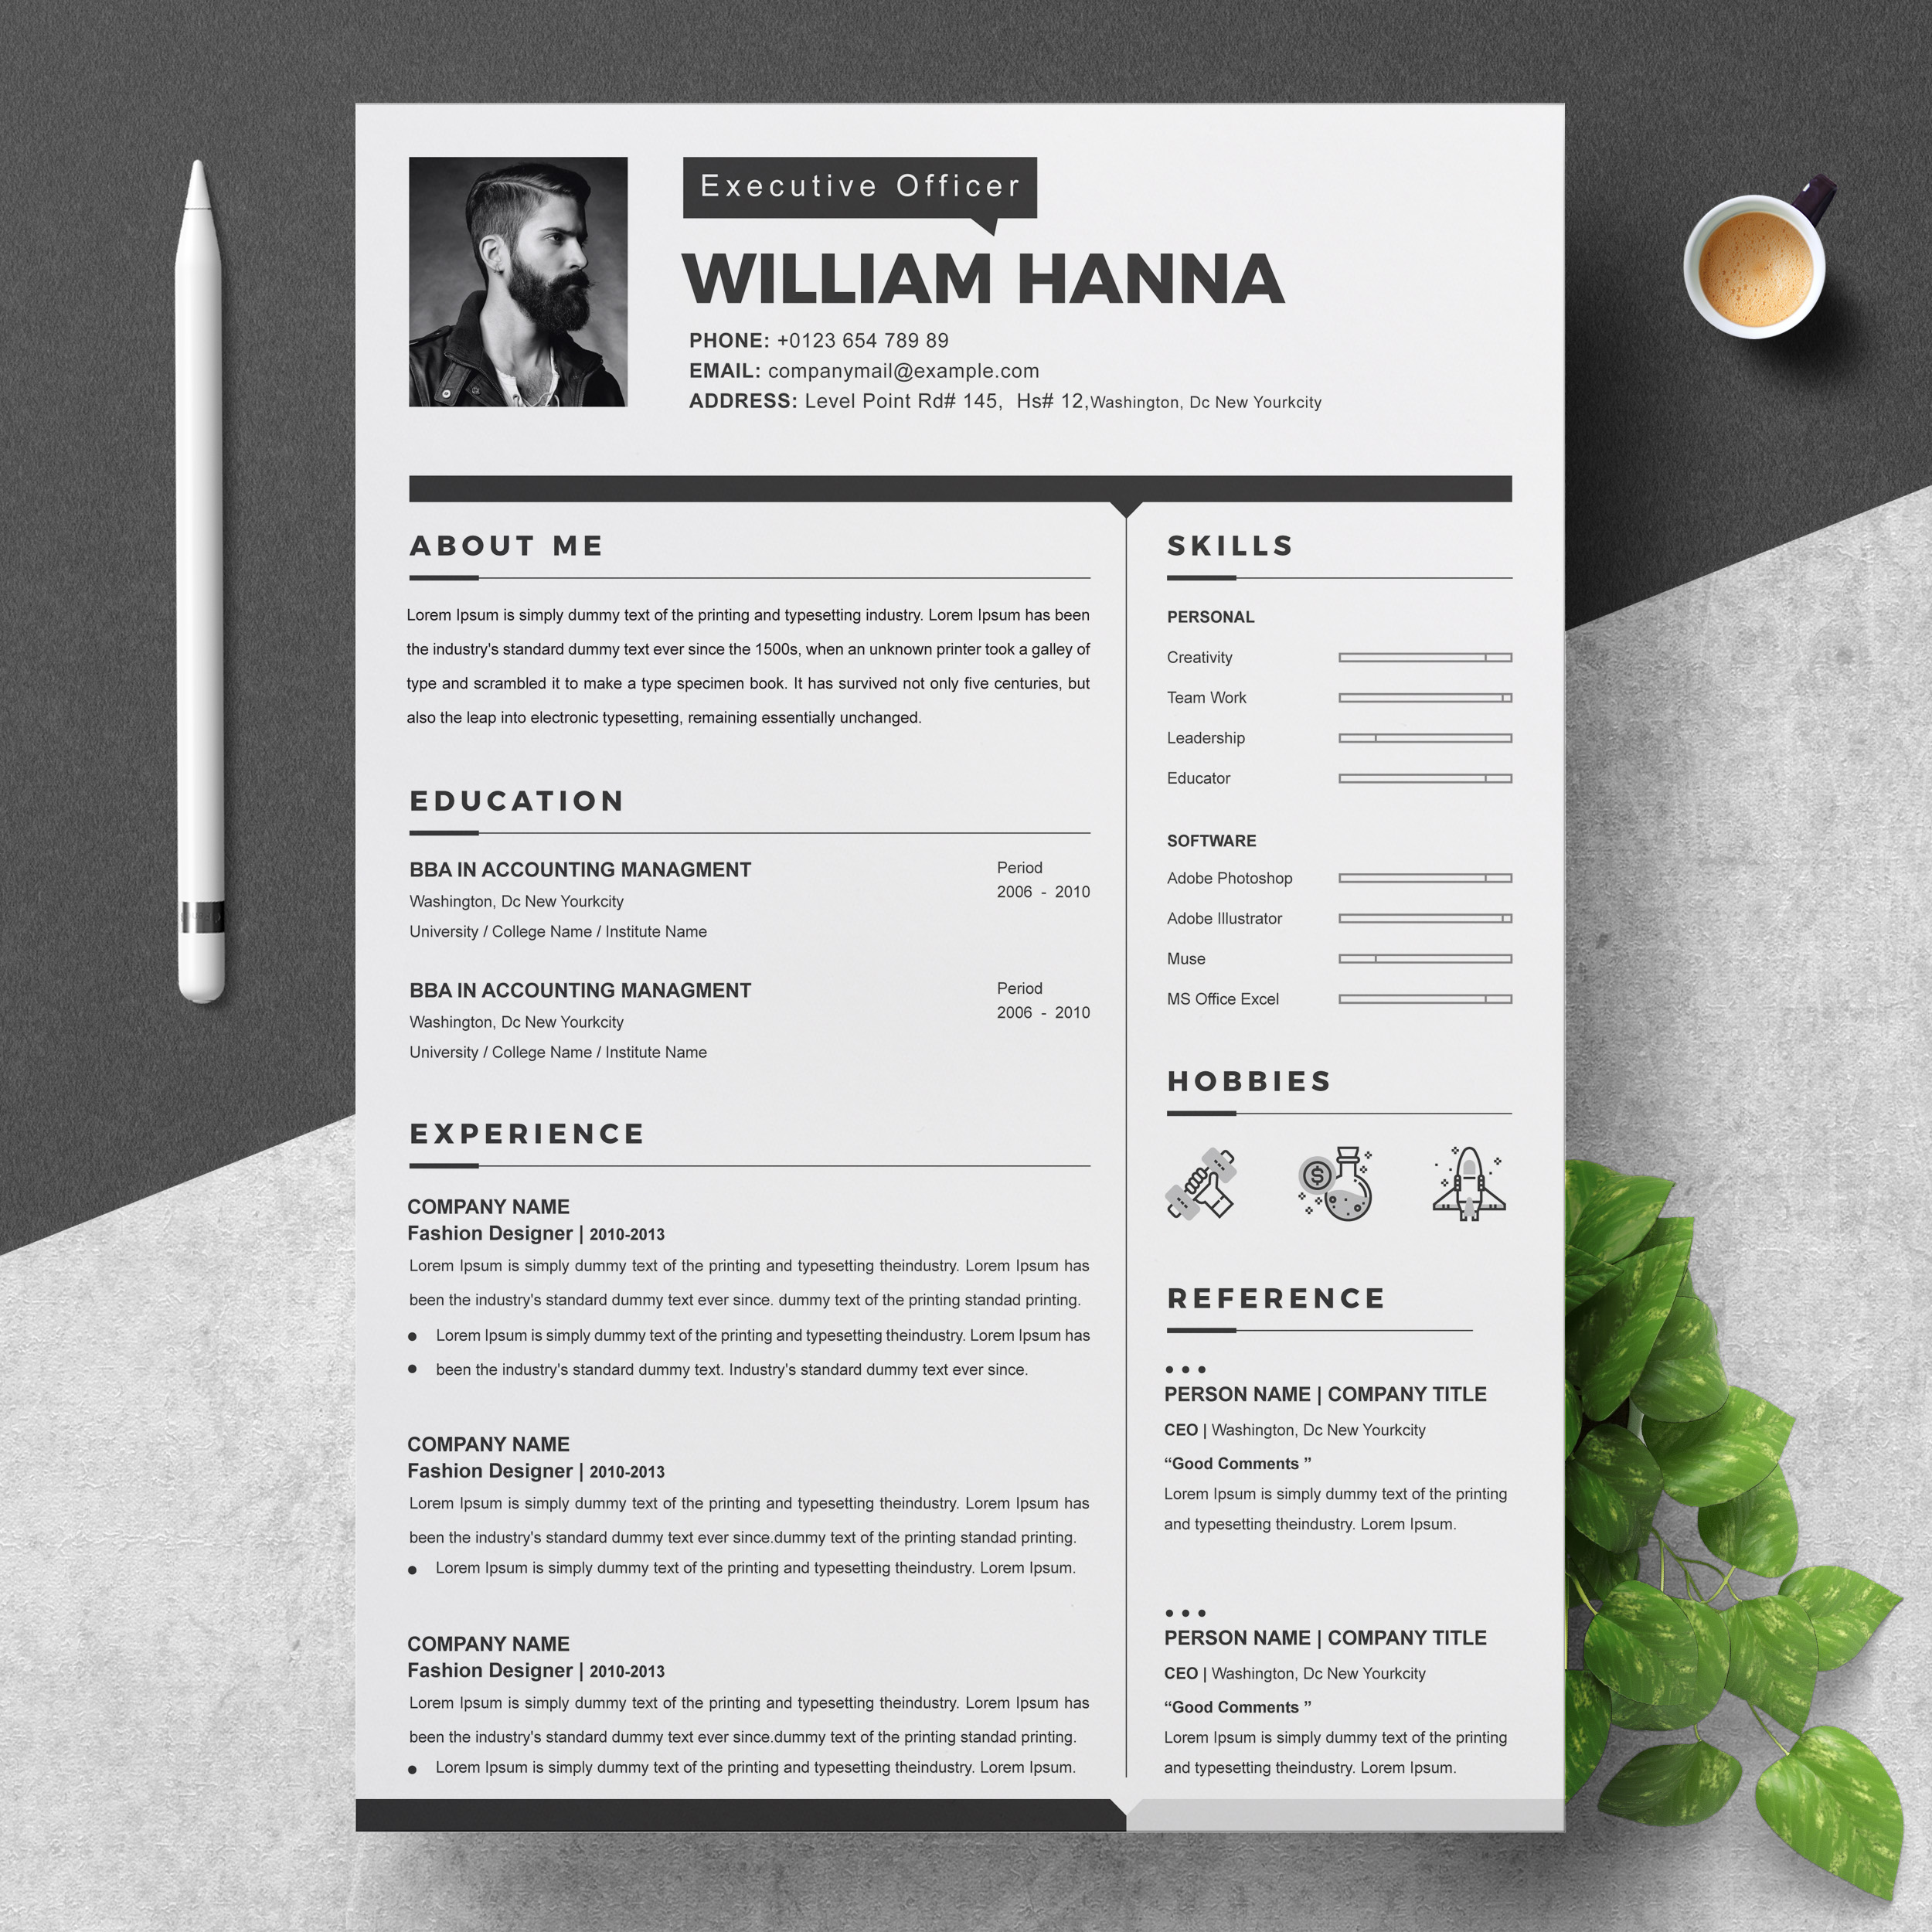 Ms Word Resume Template 2013 from resumeinventor.com